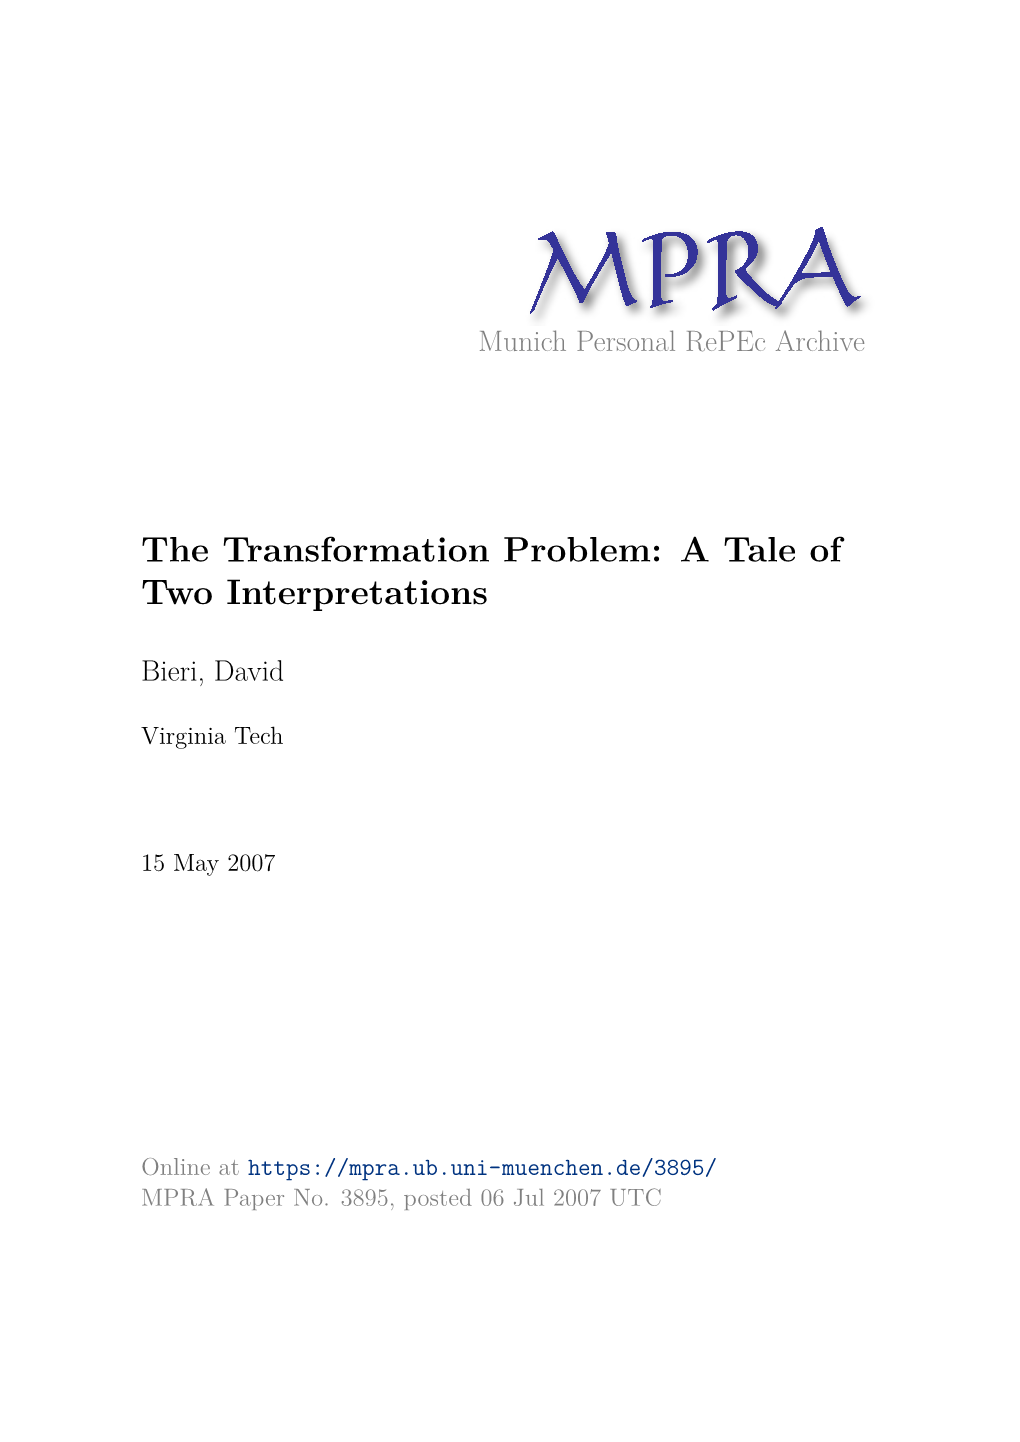 The Transformation Problem: a Tale of Two Interpretations